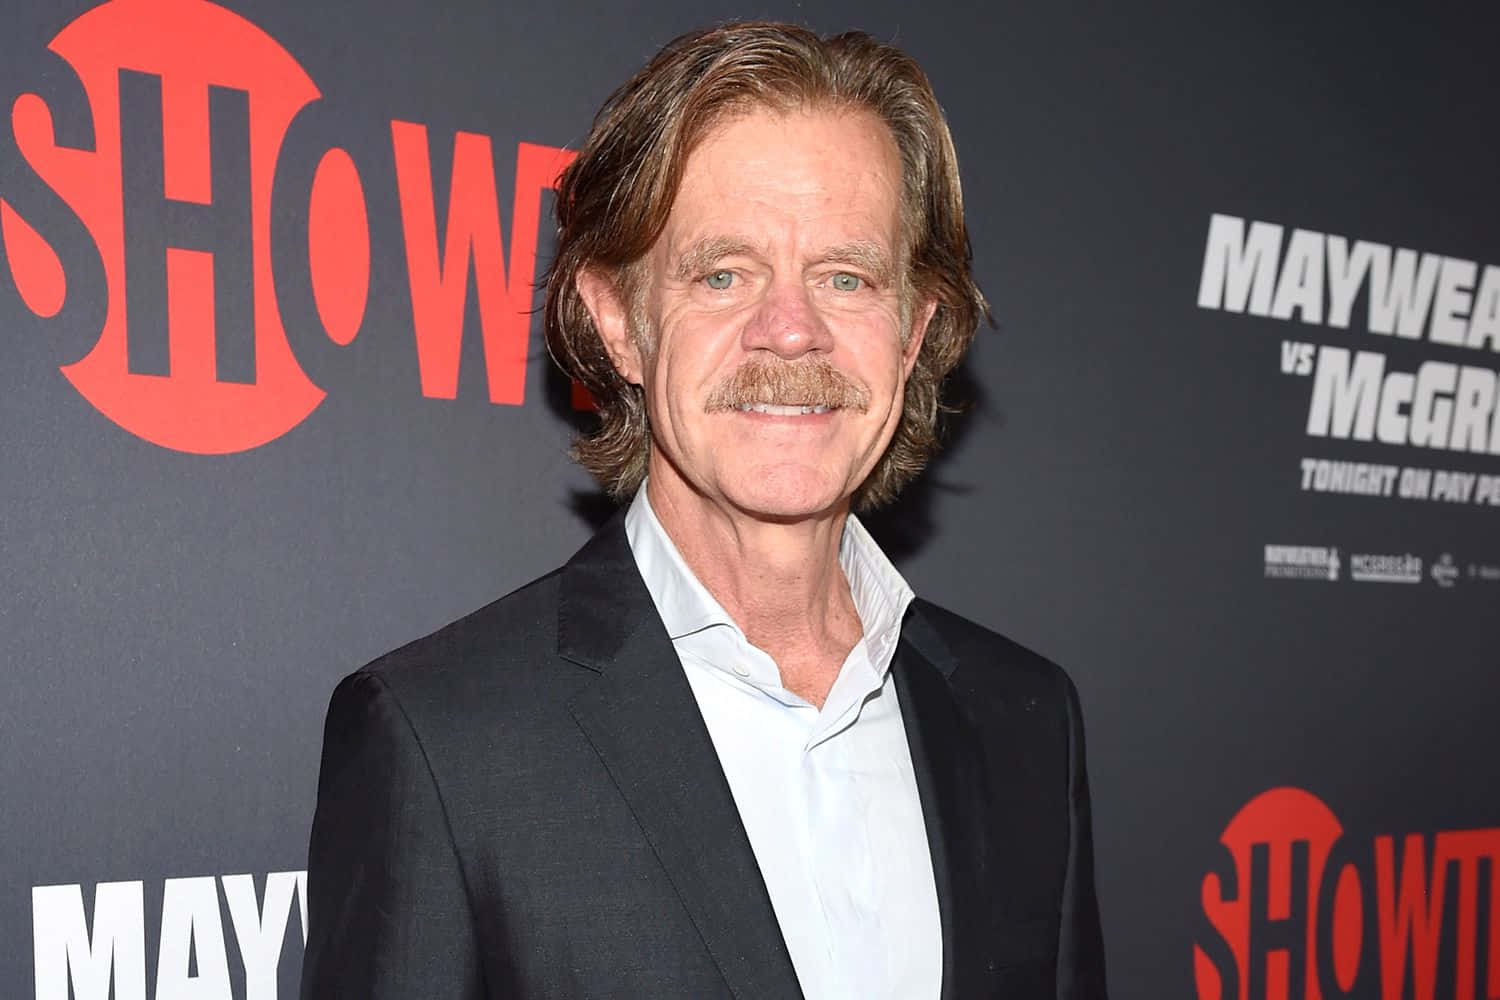 William H. Macy Posing For A Professional Photo Shoot